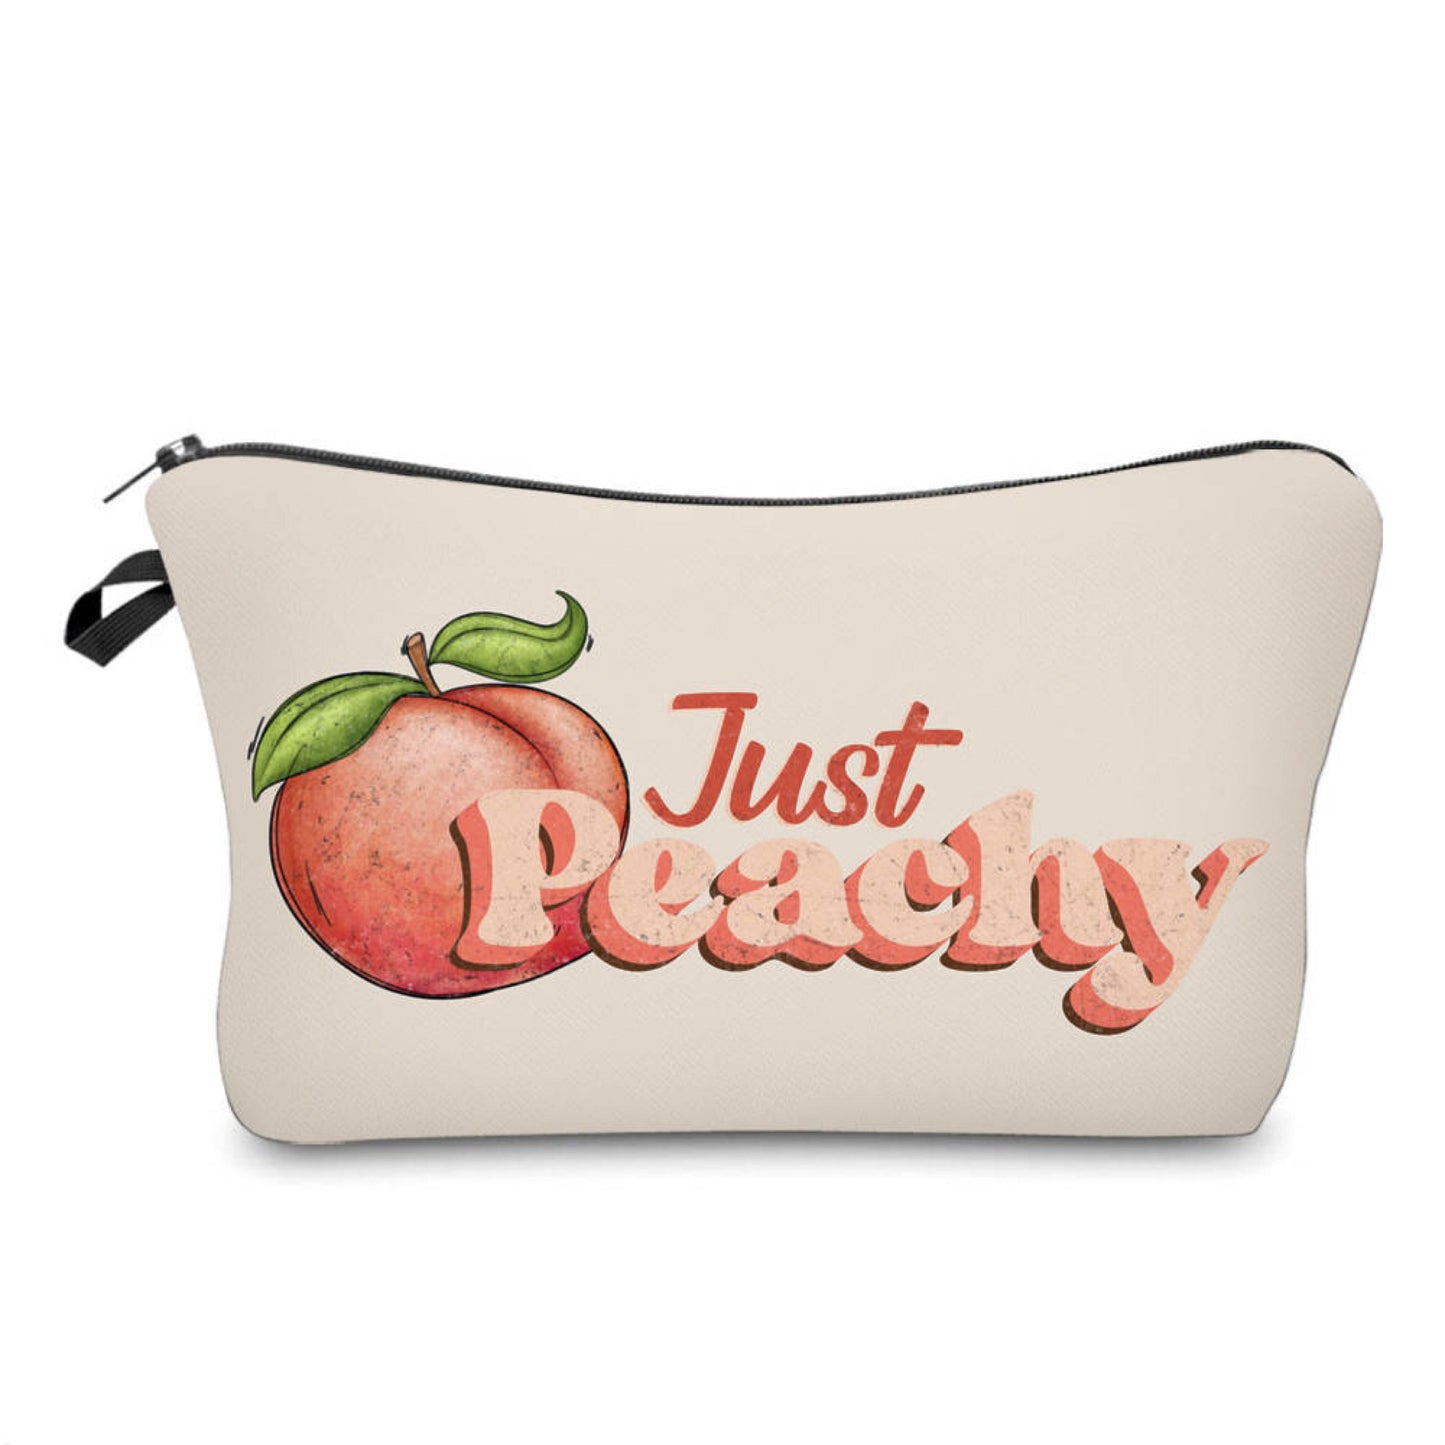 Pouch - Just Peachy